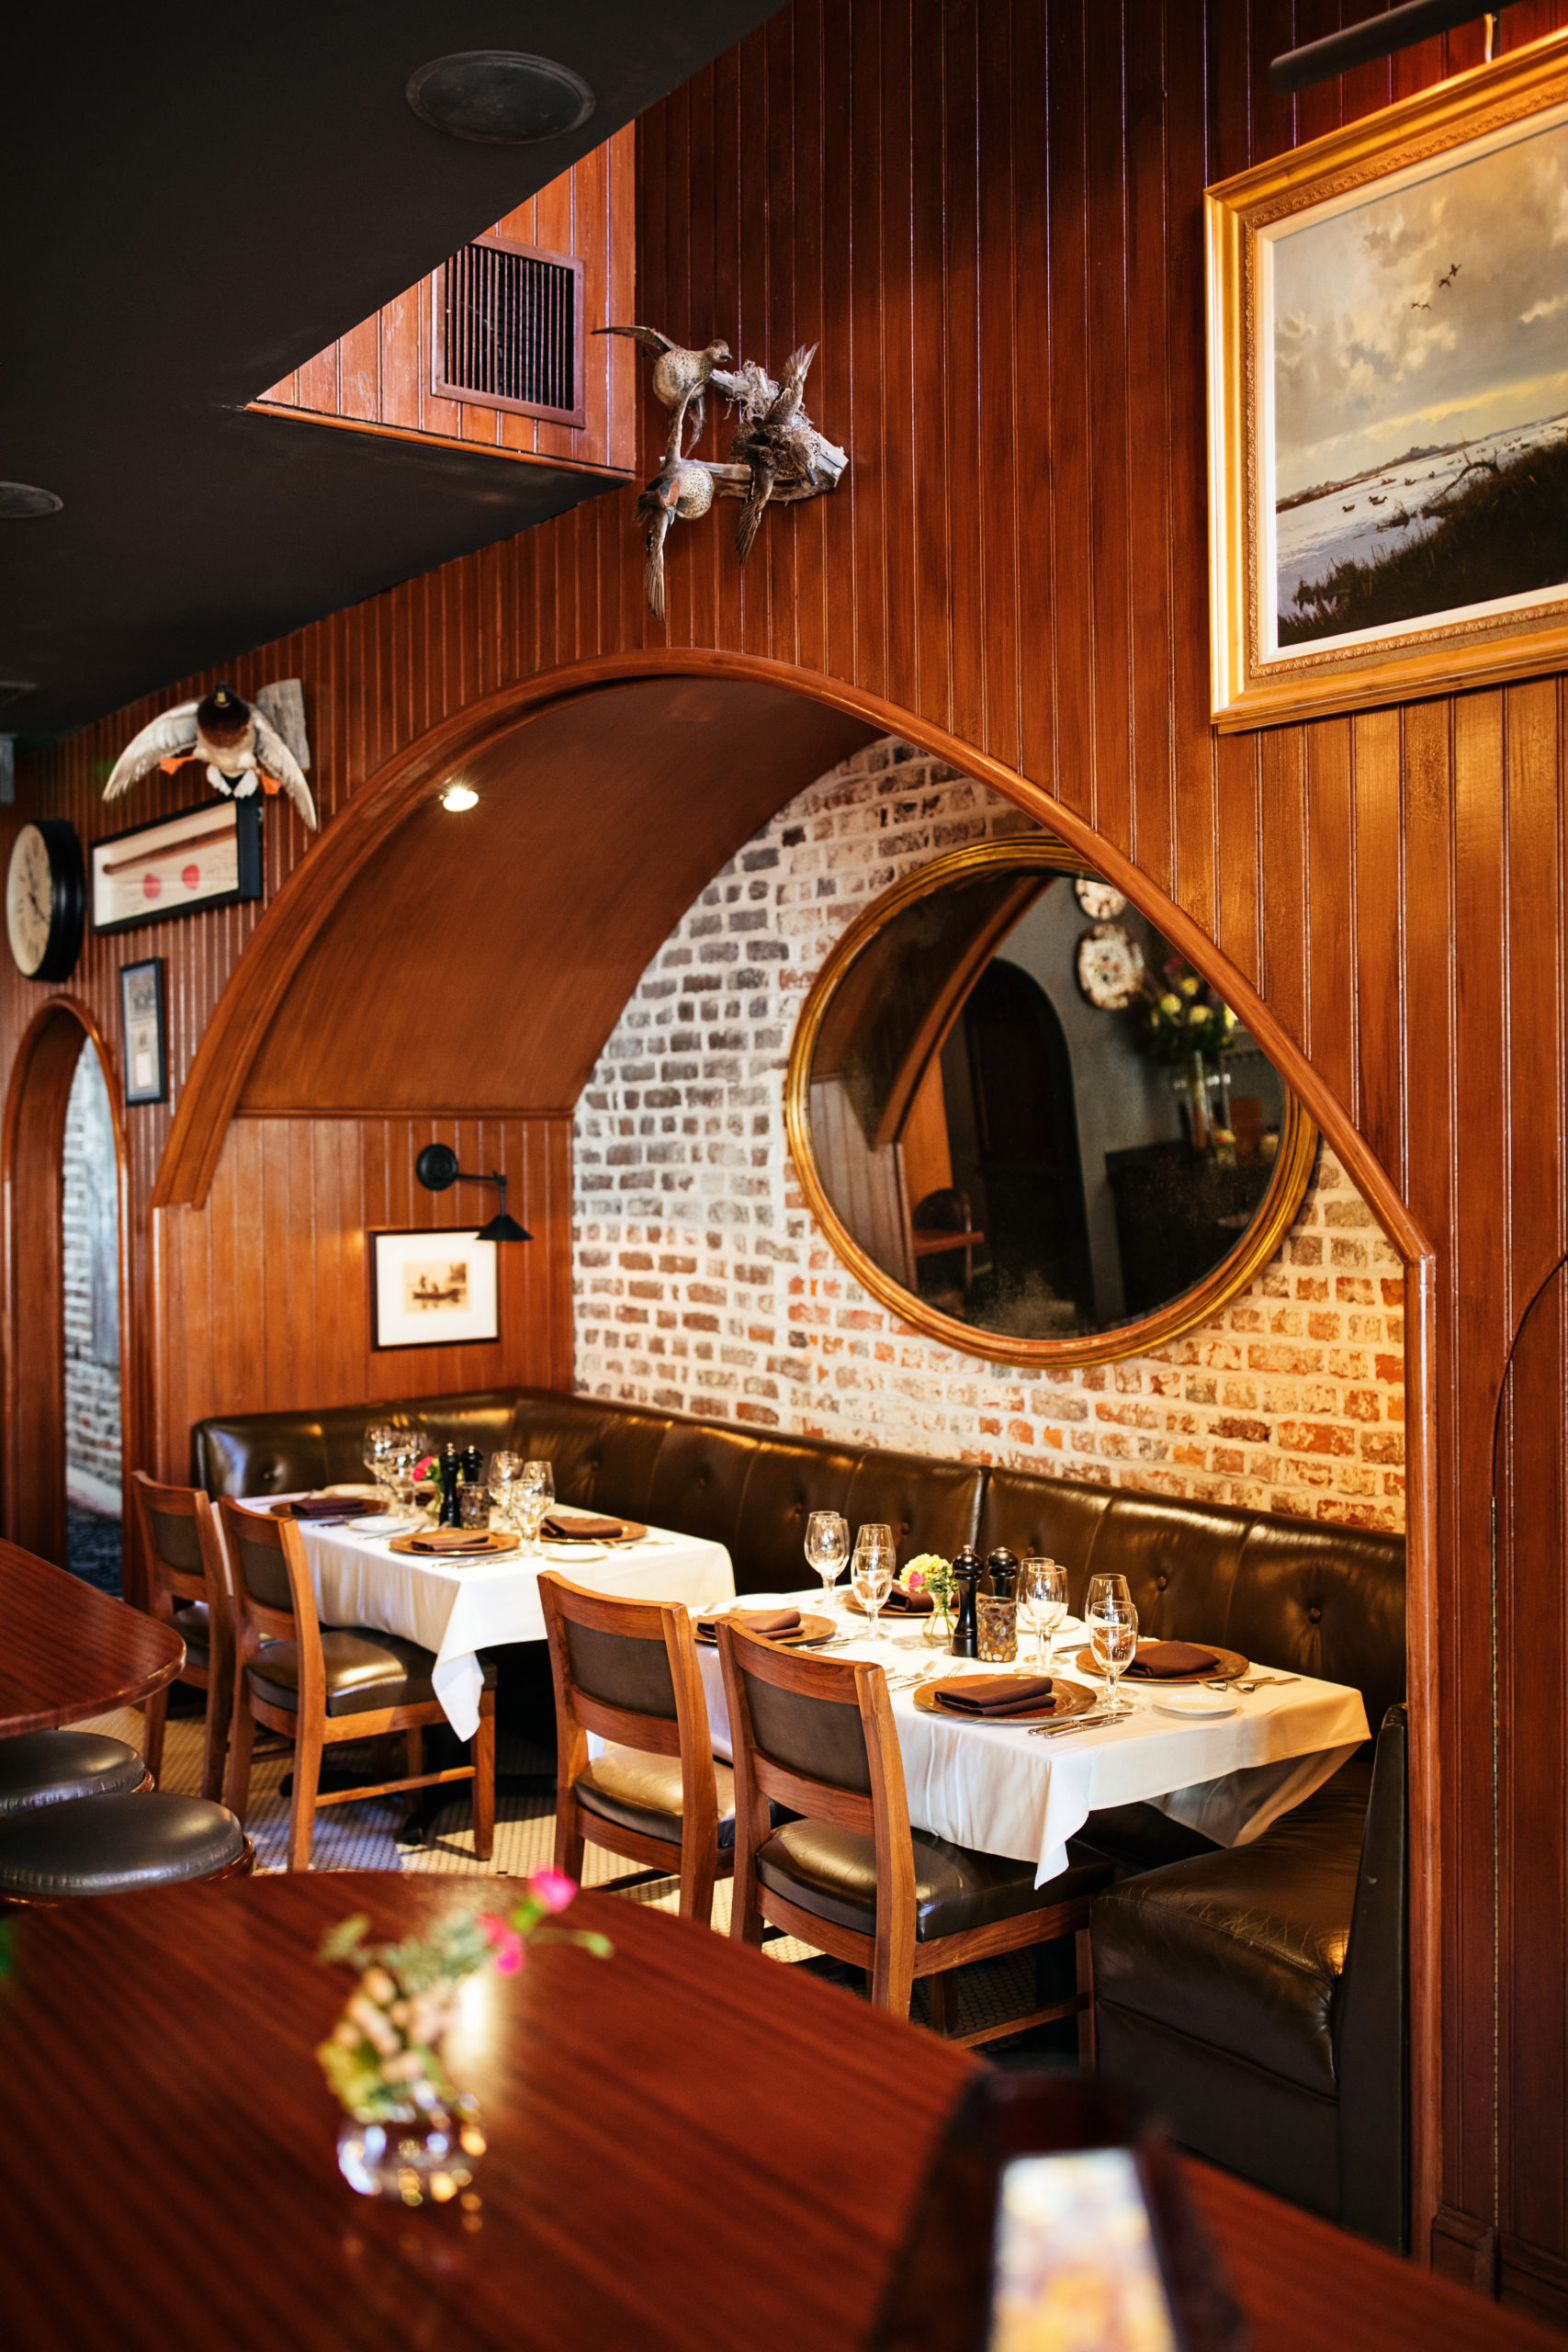 Oval mirror inside a wood arched wall with dining tables underneath